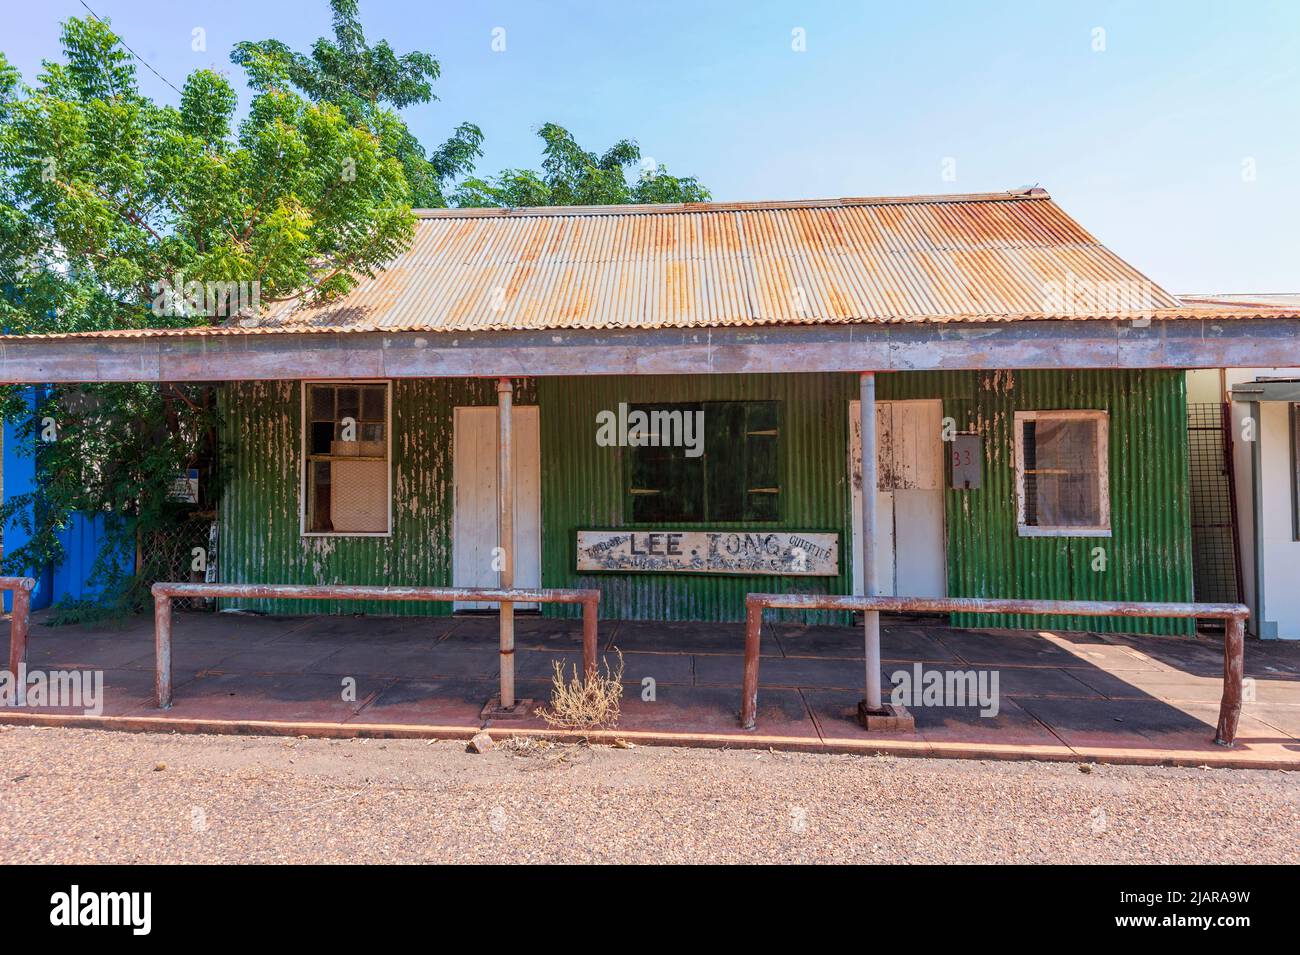 Exterior of the old Lee Tong Outfitter shop from pioneering days, Wyndham, Western Australia, WA, Australia Stock Photo